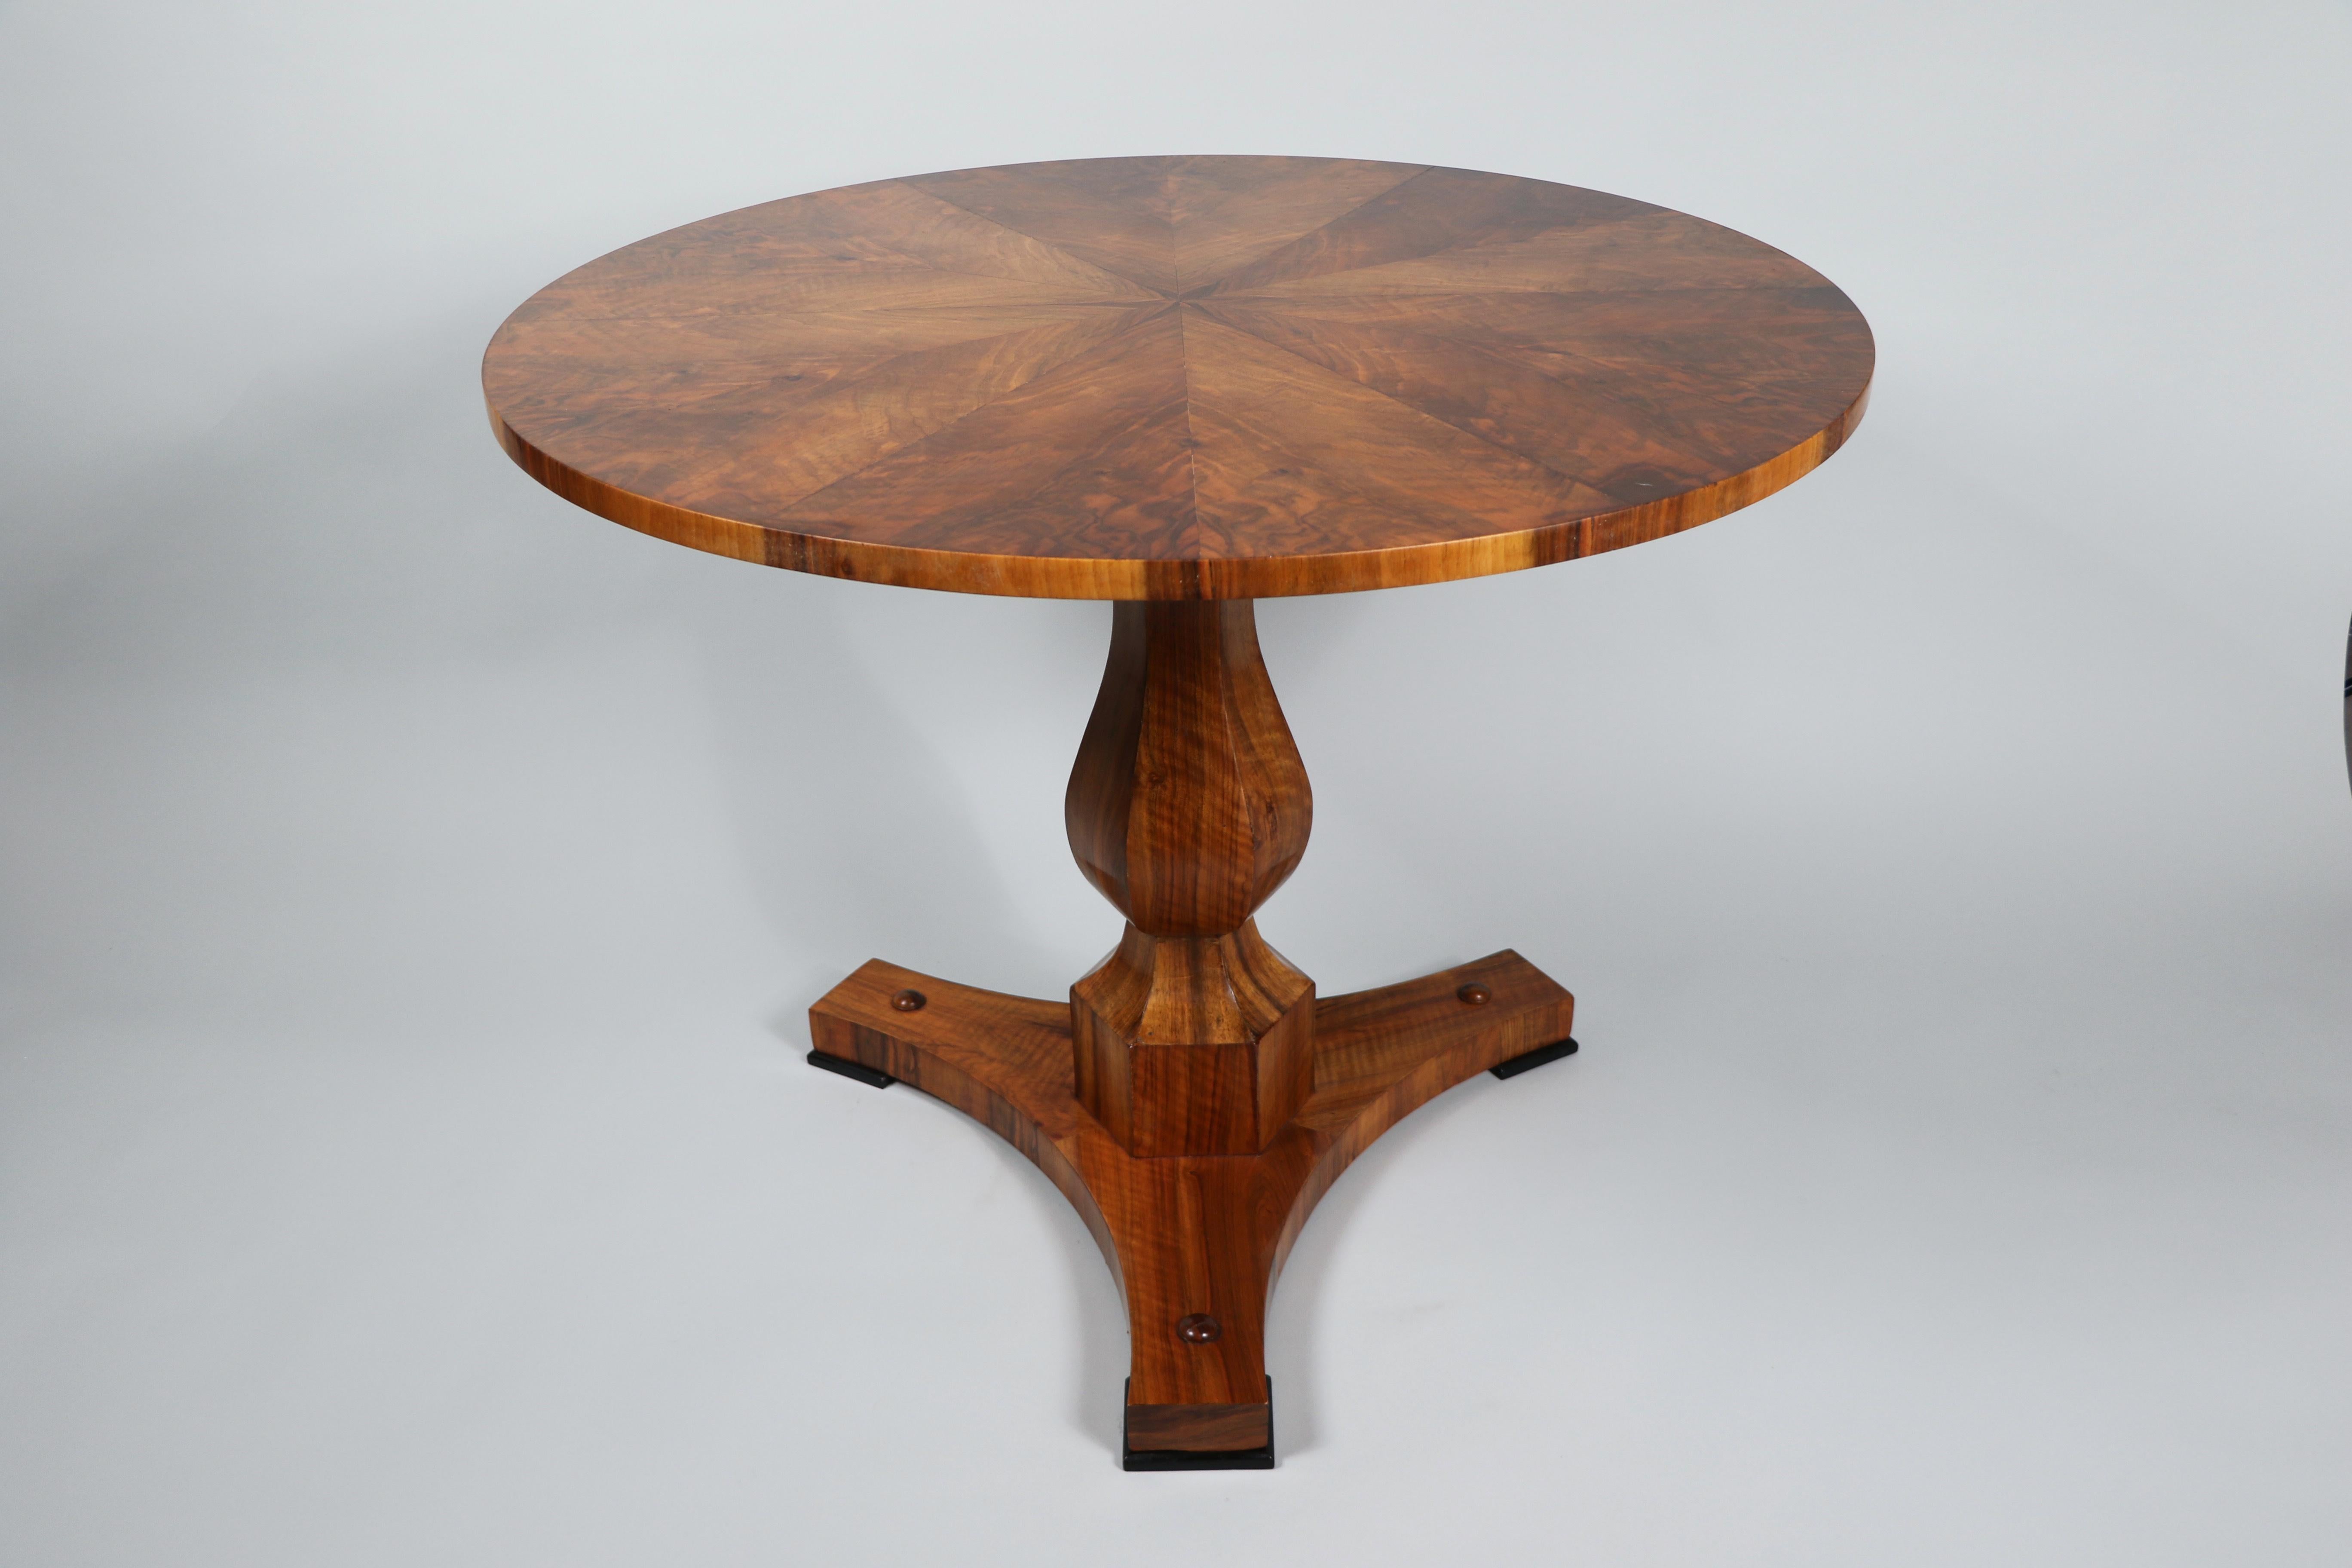 Hello,
This fine Biedermeier walnut pedestal table is the best example of top-quality Viennese piece from circa 1830.

Viennese Biedermeier is distinguished by their sophisticated proportions, rare and refined design and excellent craftsmanship and